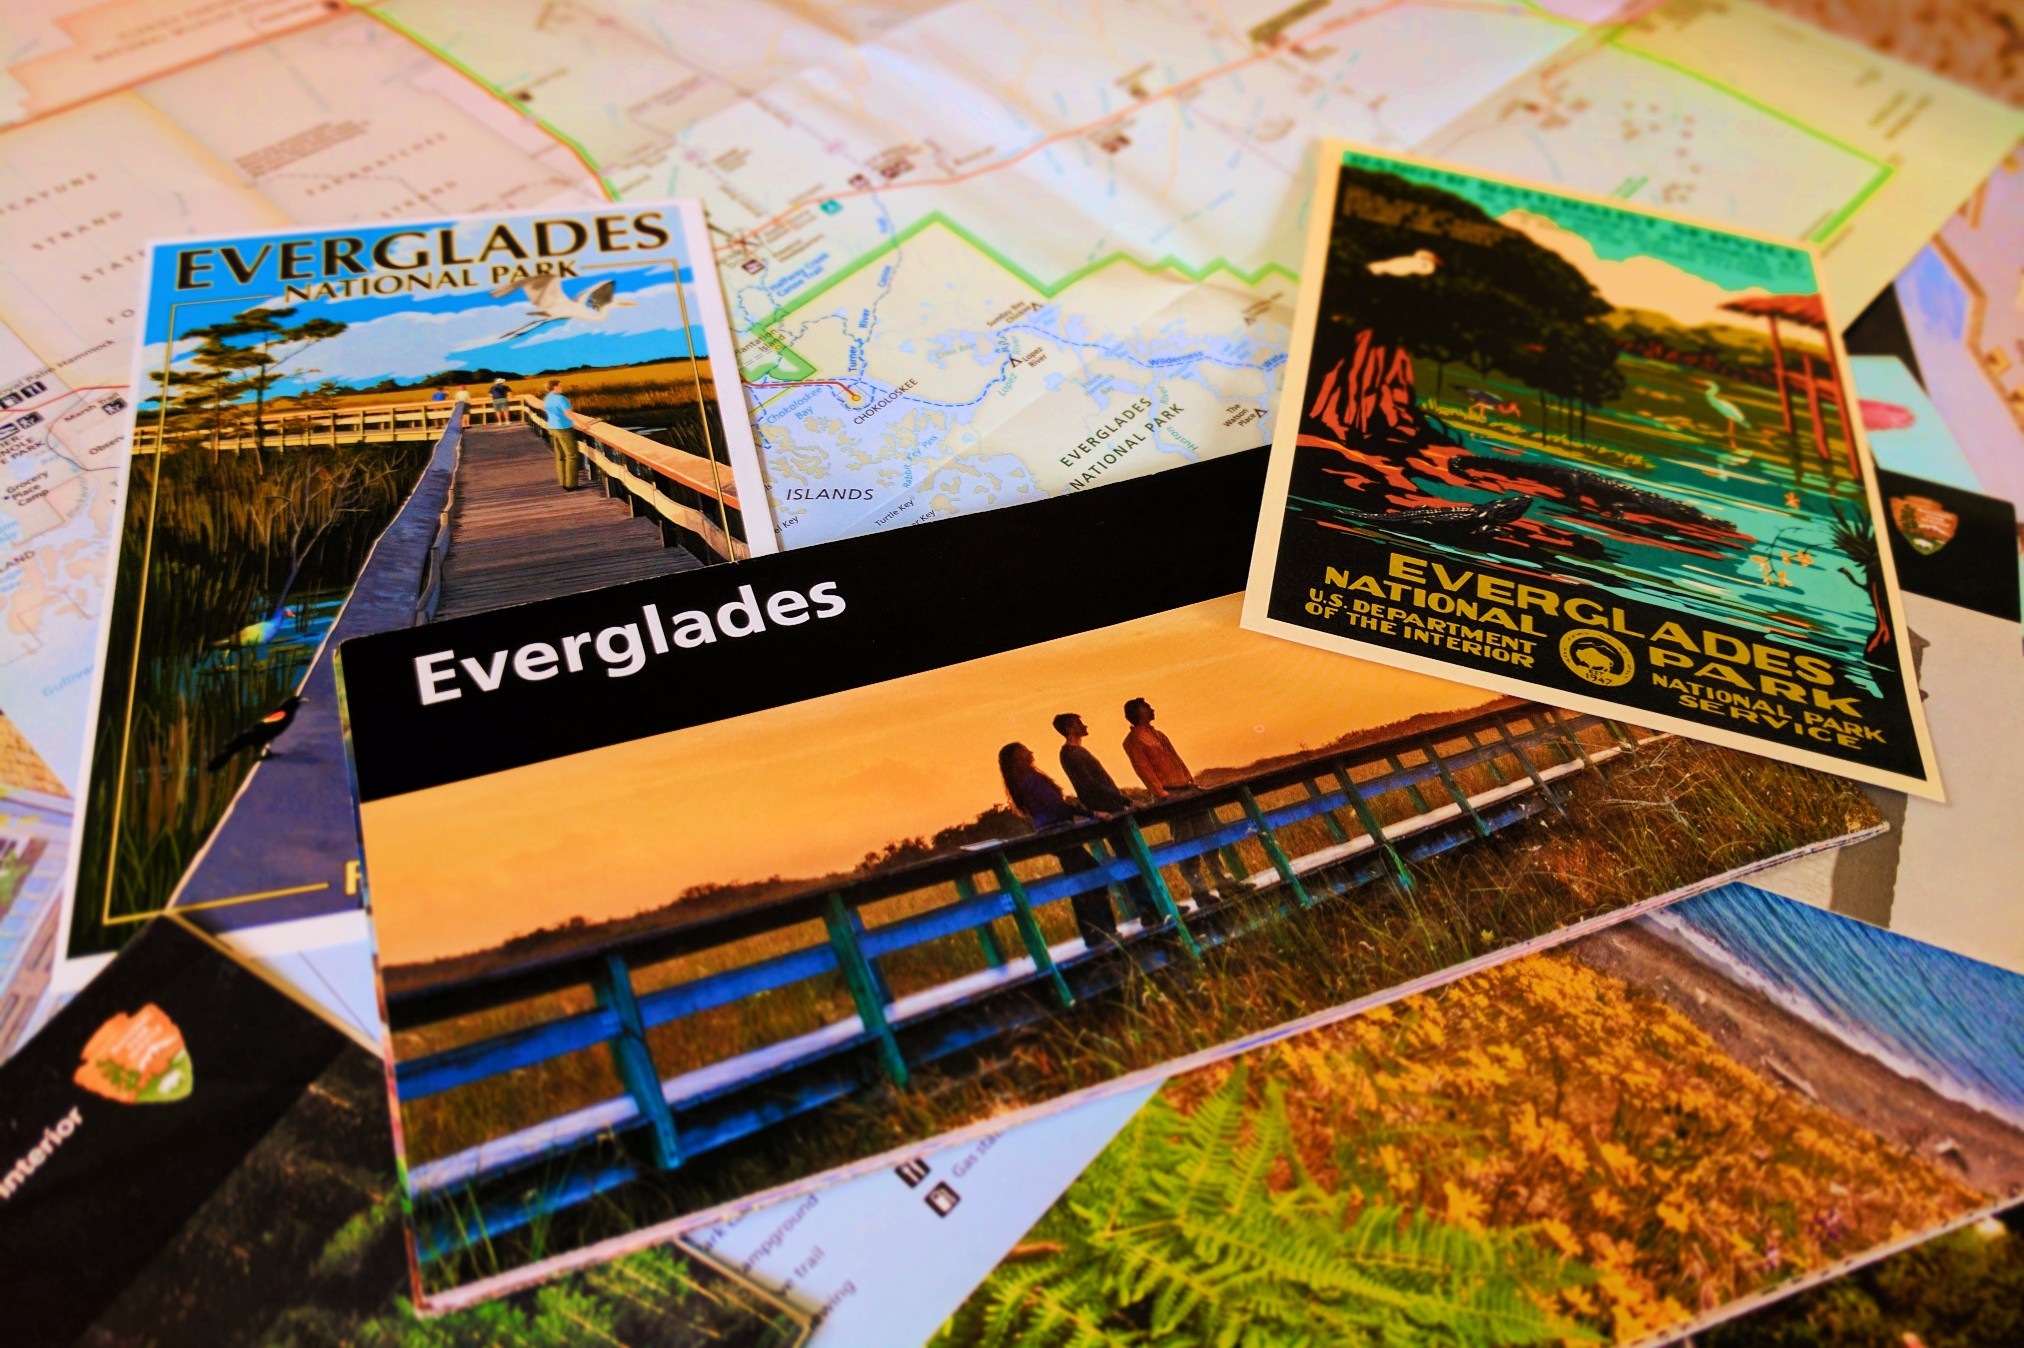 Visiting Everglades National Park with Kids